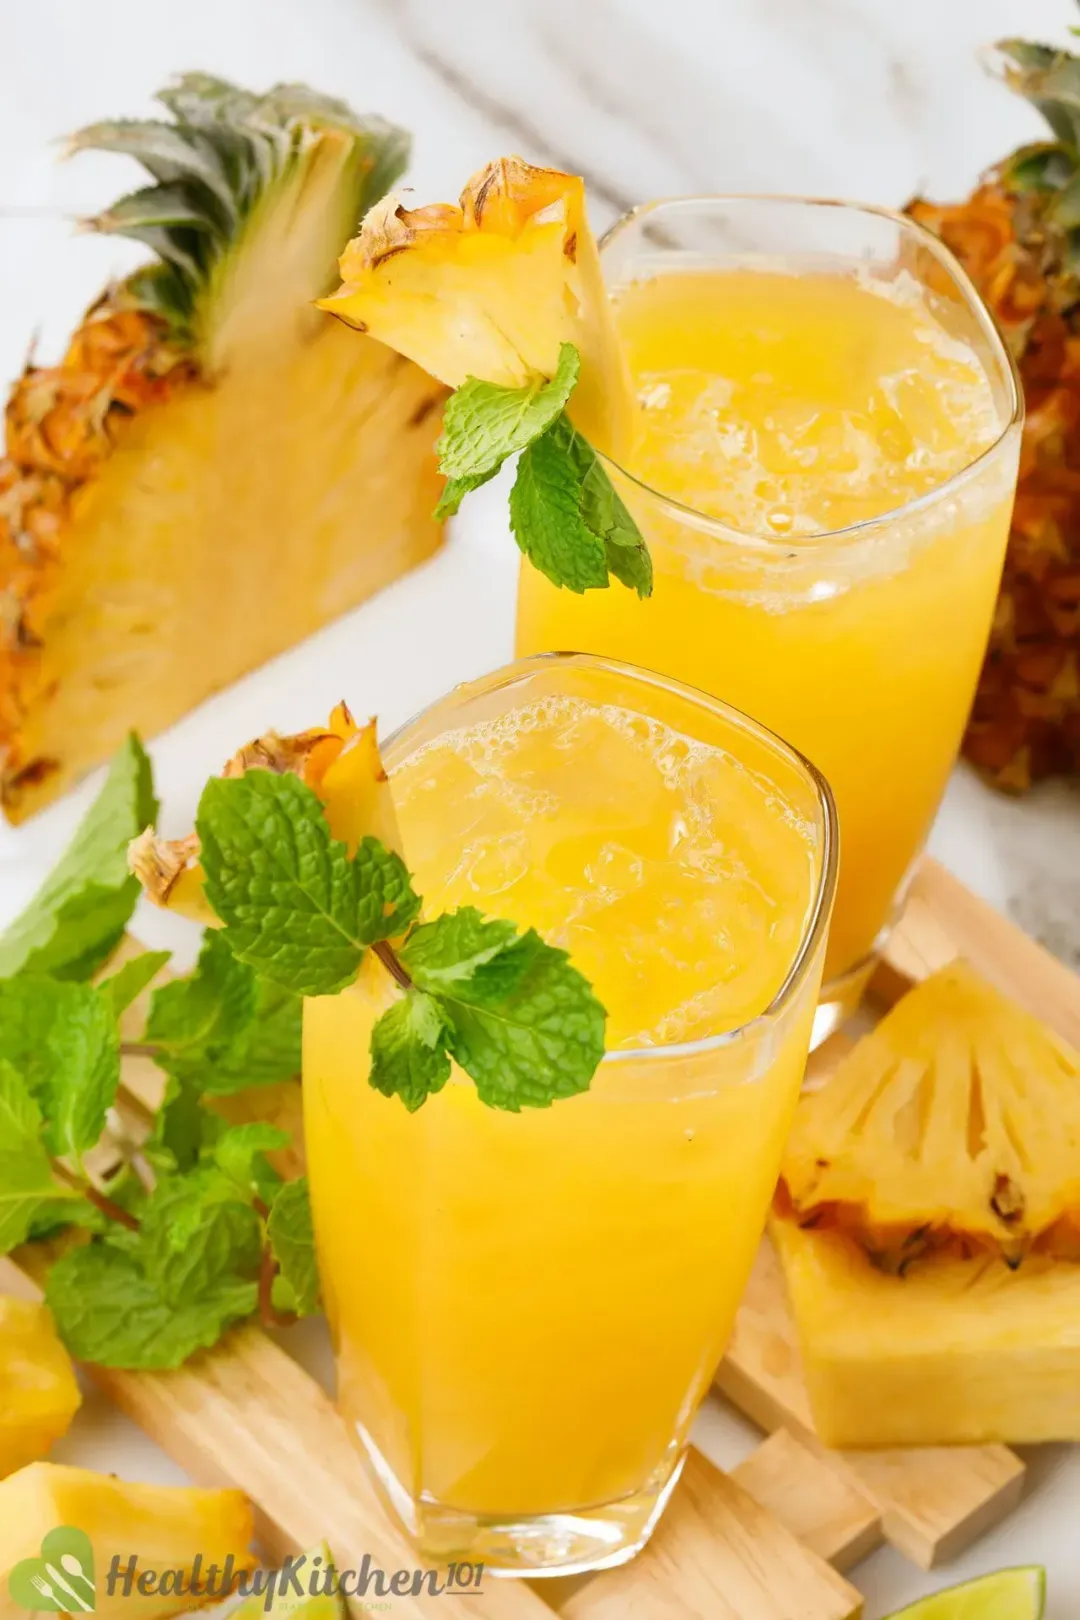 Two glasses of pineapple and apple cider vinegar drinks garnished with mint leaves and pineapple wedges